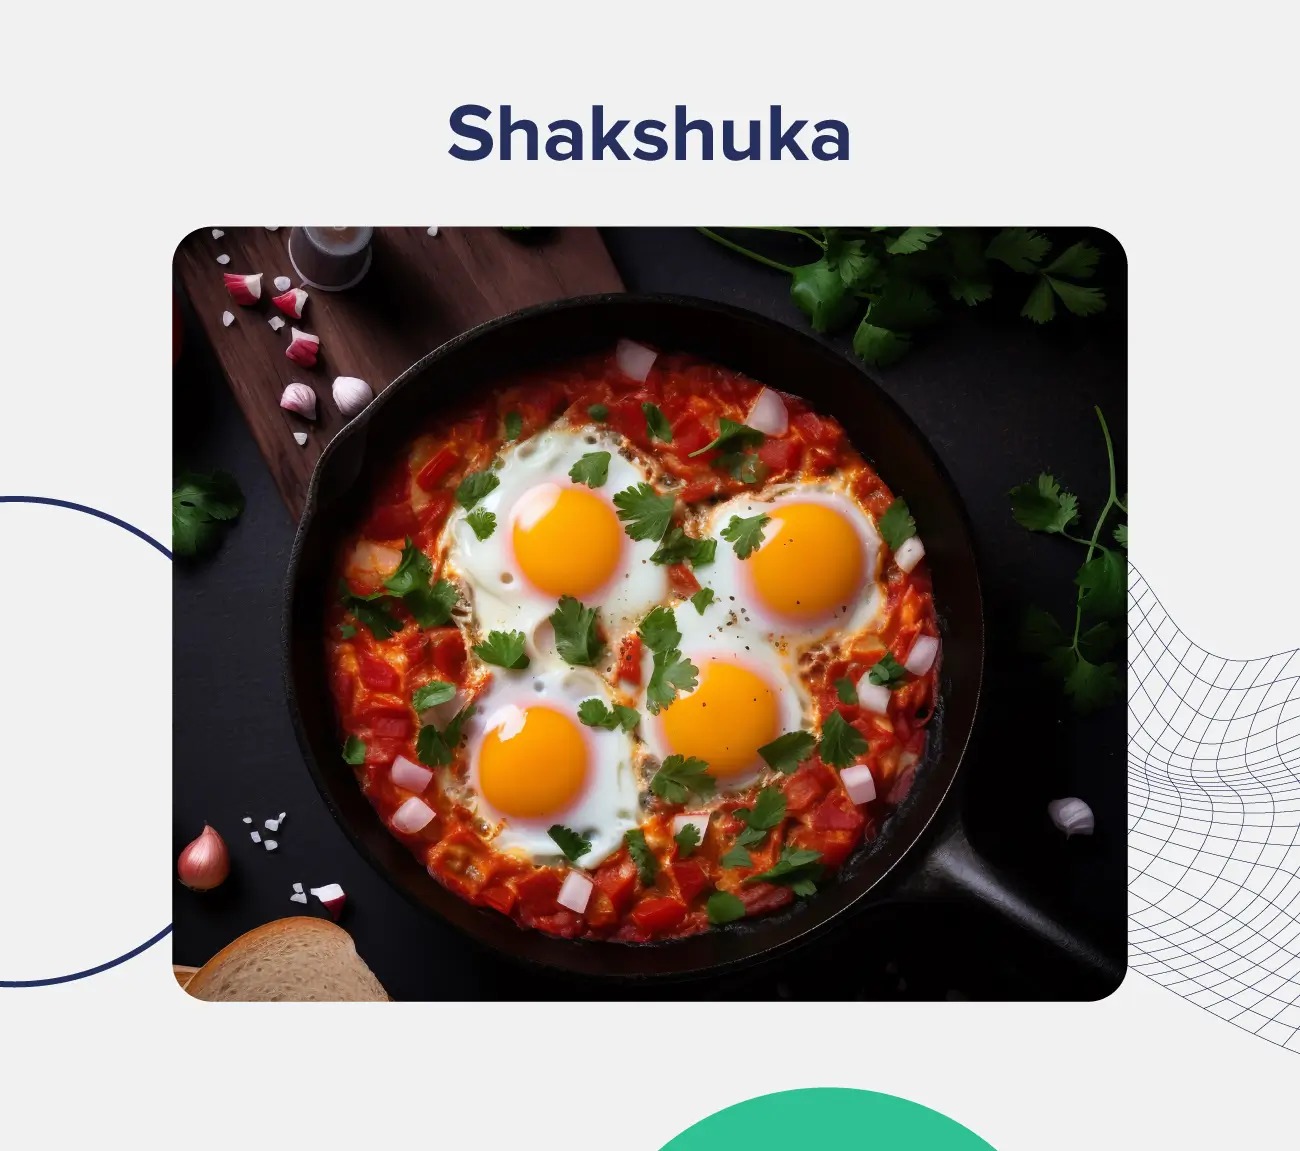 A graphic entitled "Shakshuka" featuring an image of the dish, which contains eggs poached in a chunky tomato and onion sauce.